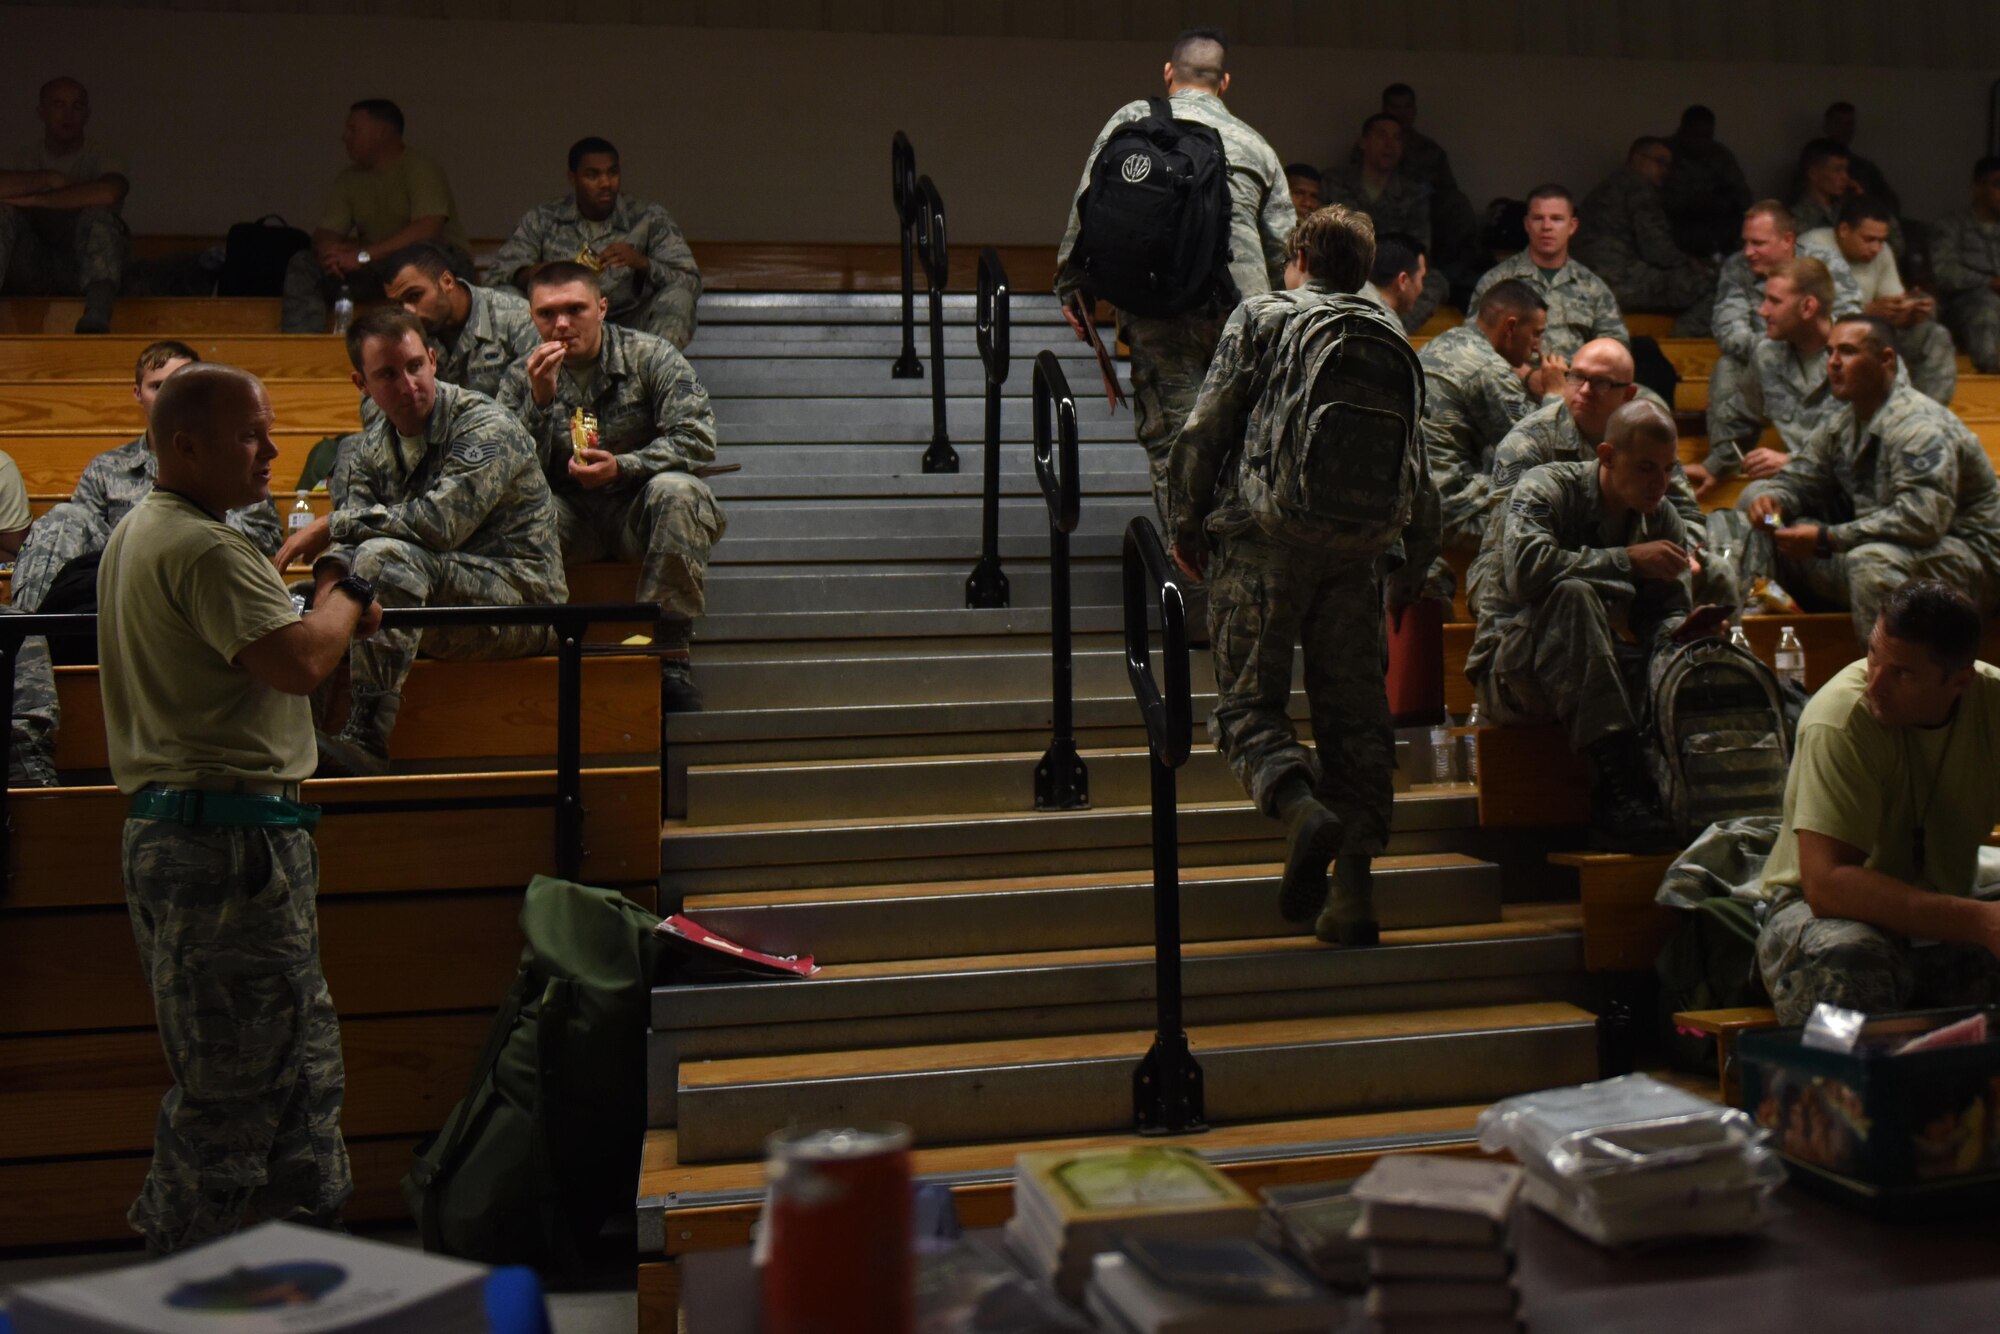 Exercise Thunderdome 17-02 participants prepare to receive a pre-deployment brief, July 20, 2017, at Seymour Johnson Air Force Base, North Carolina. The exercise allowed members of the 4th Fighter Wing strengthen skills in the event of a real-world short notice deployment tasking. (U.S. Air Force photo by Senior Airman Ashley Maldonado)